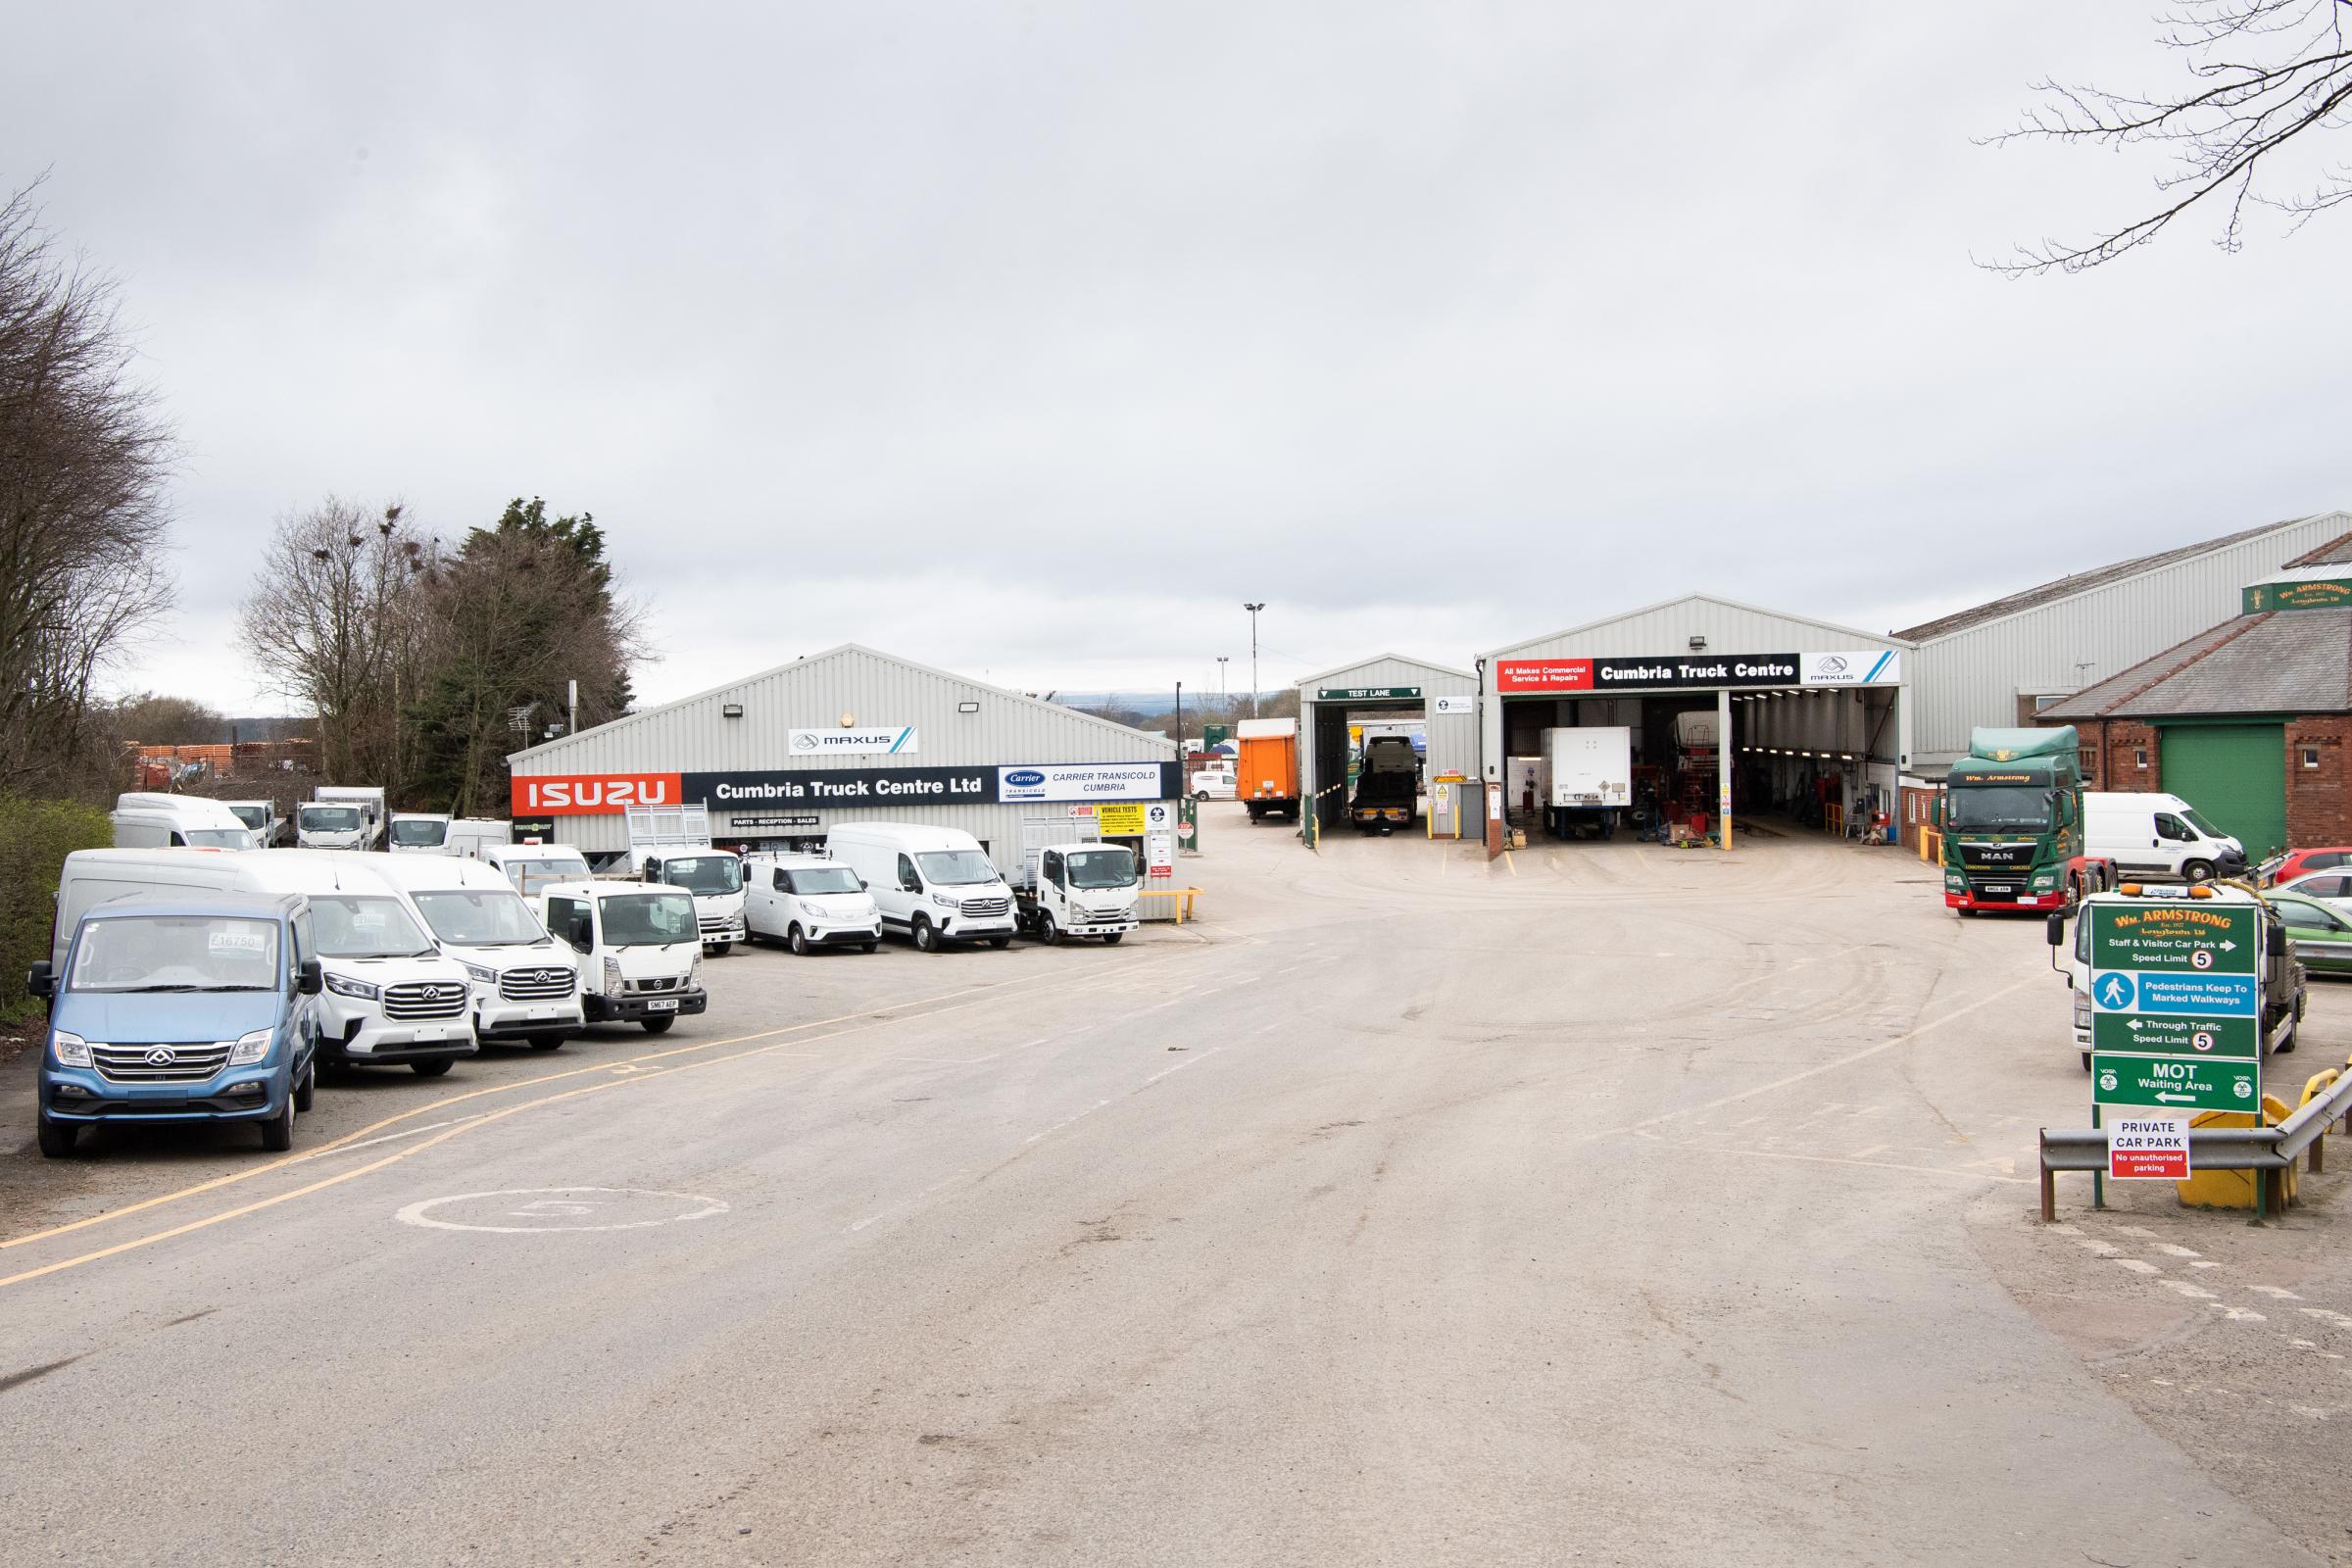 23Additional services available at Longtown include the Cumbria Truck Centre dealership for Hino and Isuzu trucks, which in conjunction with the Armstrong Trucks dealership in Glasgow Ref:RH200321132 Rob Haining / The Scottish Farmer...